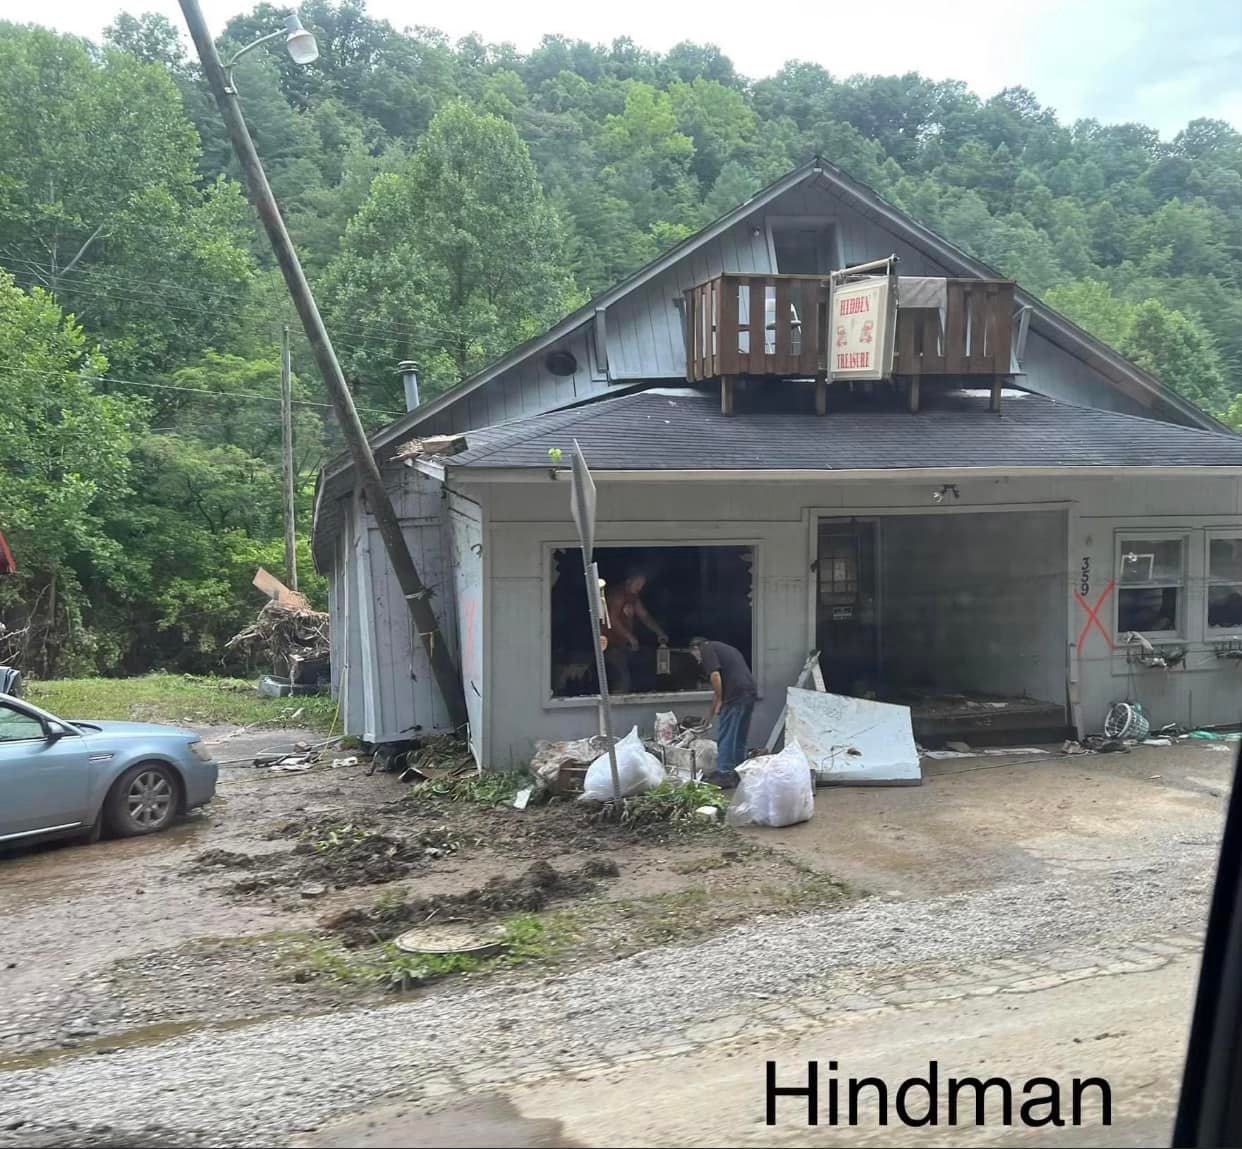 Hidden Treasure Shop along E Main Street (KY-550) in Hindman severely damaged by flash flood waters from Troublesome Creekon Manchester Rd. Between S. Brentwood and McKnight in St. Louis